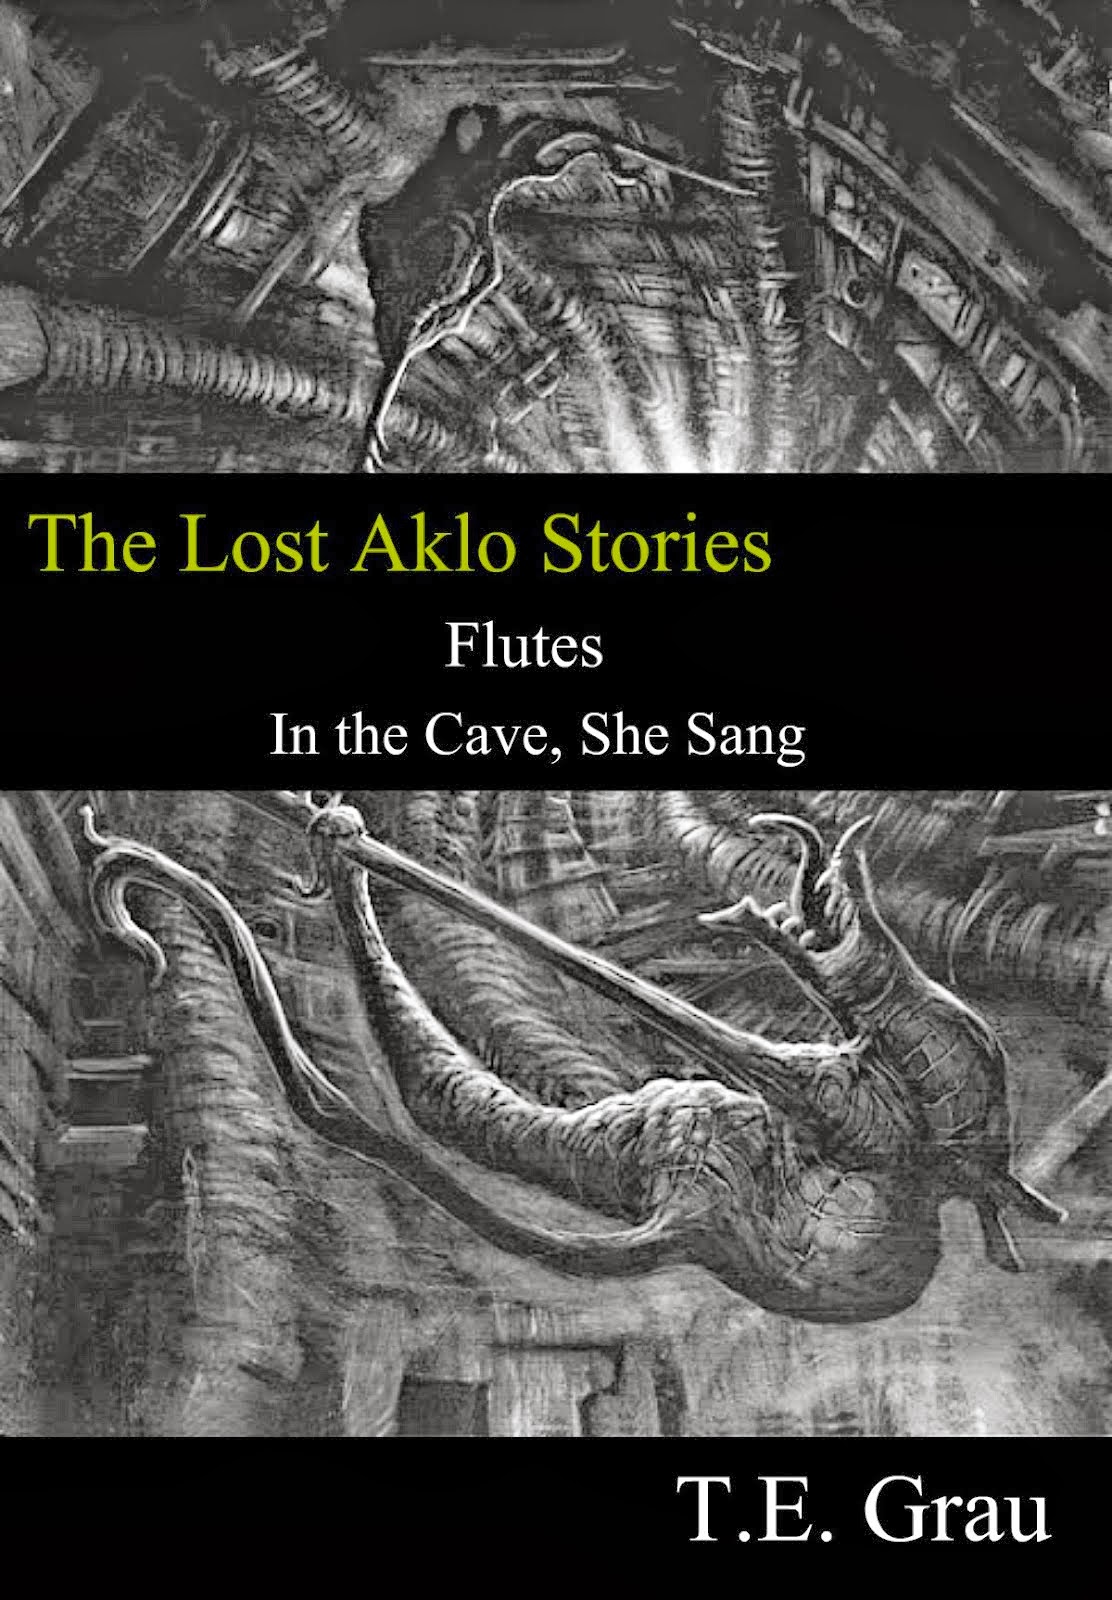 THE LOST AKLO STORIES